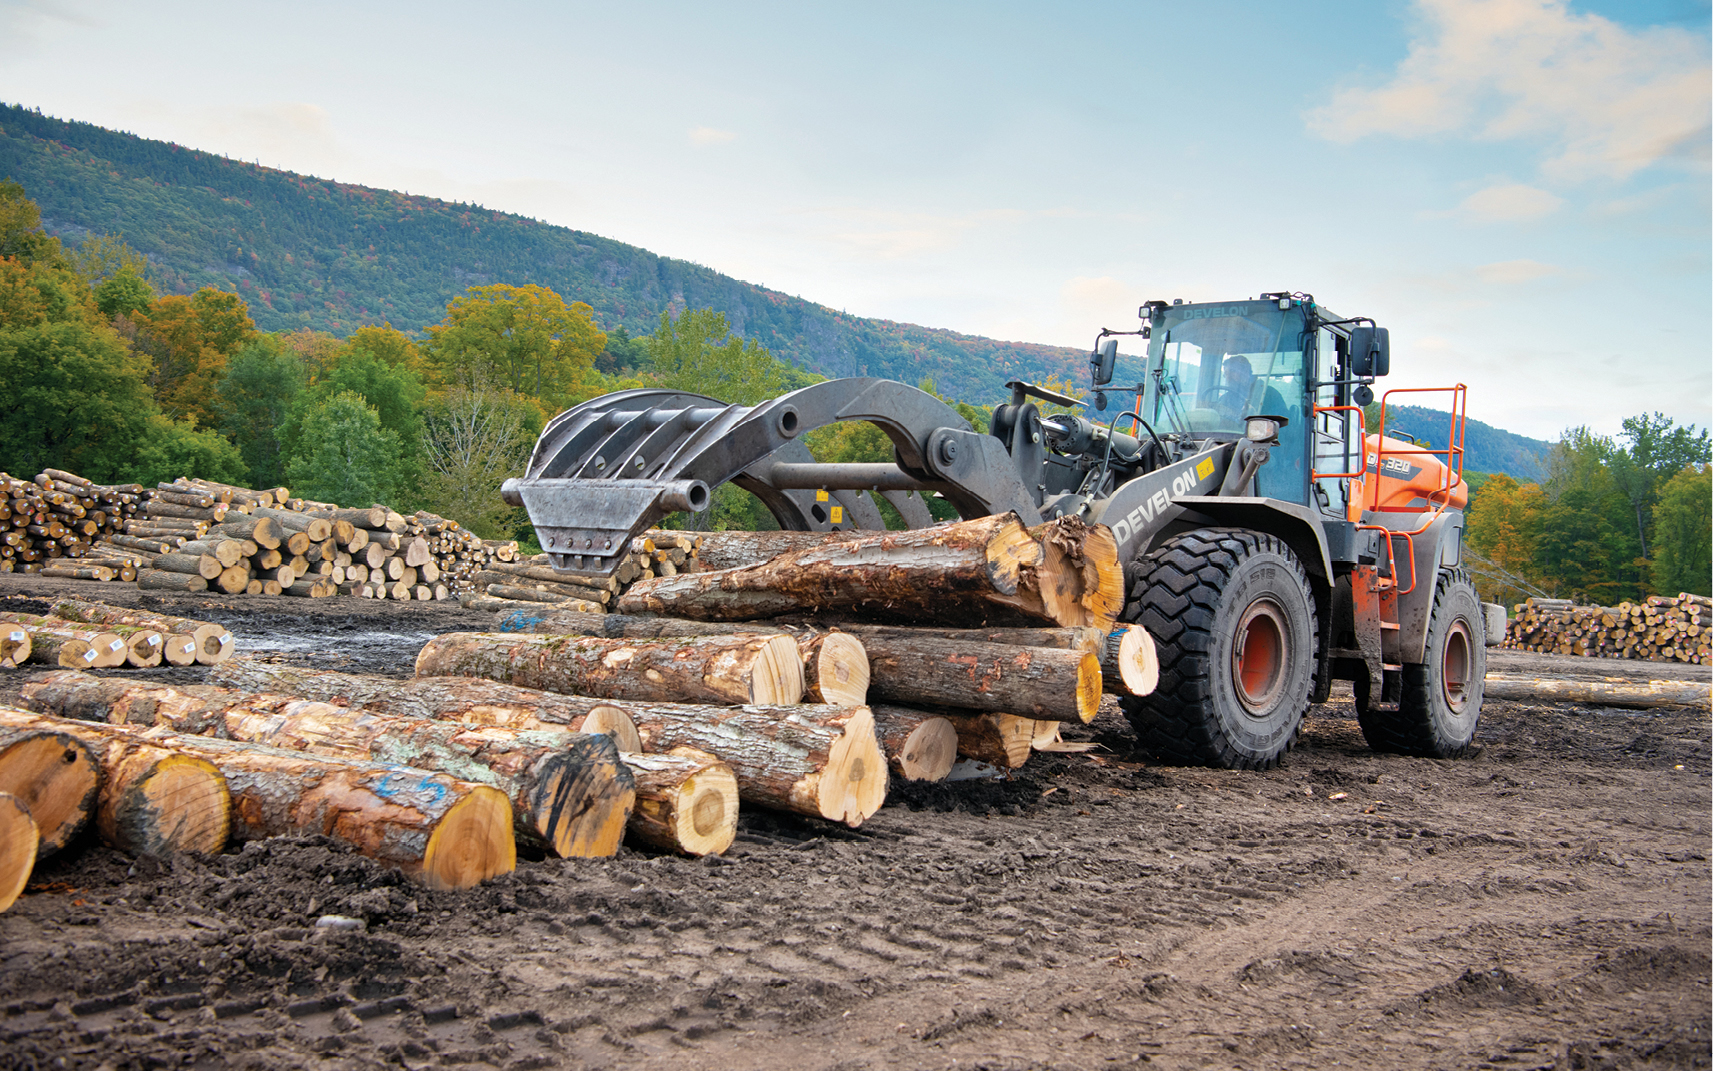 A DEVELON wheel loader equipped with a grapple attachment lifts a stack of logs.